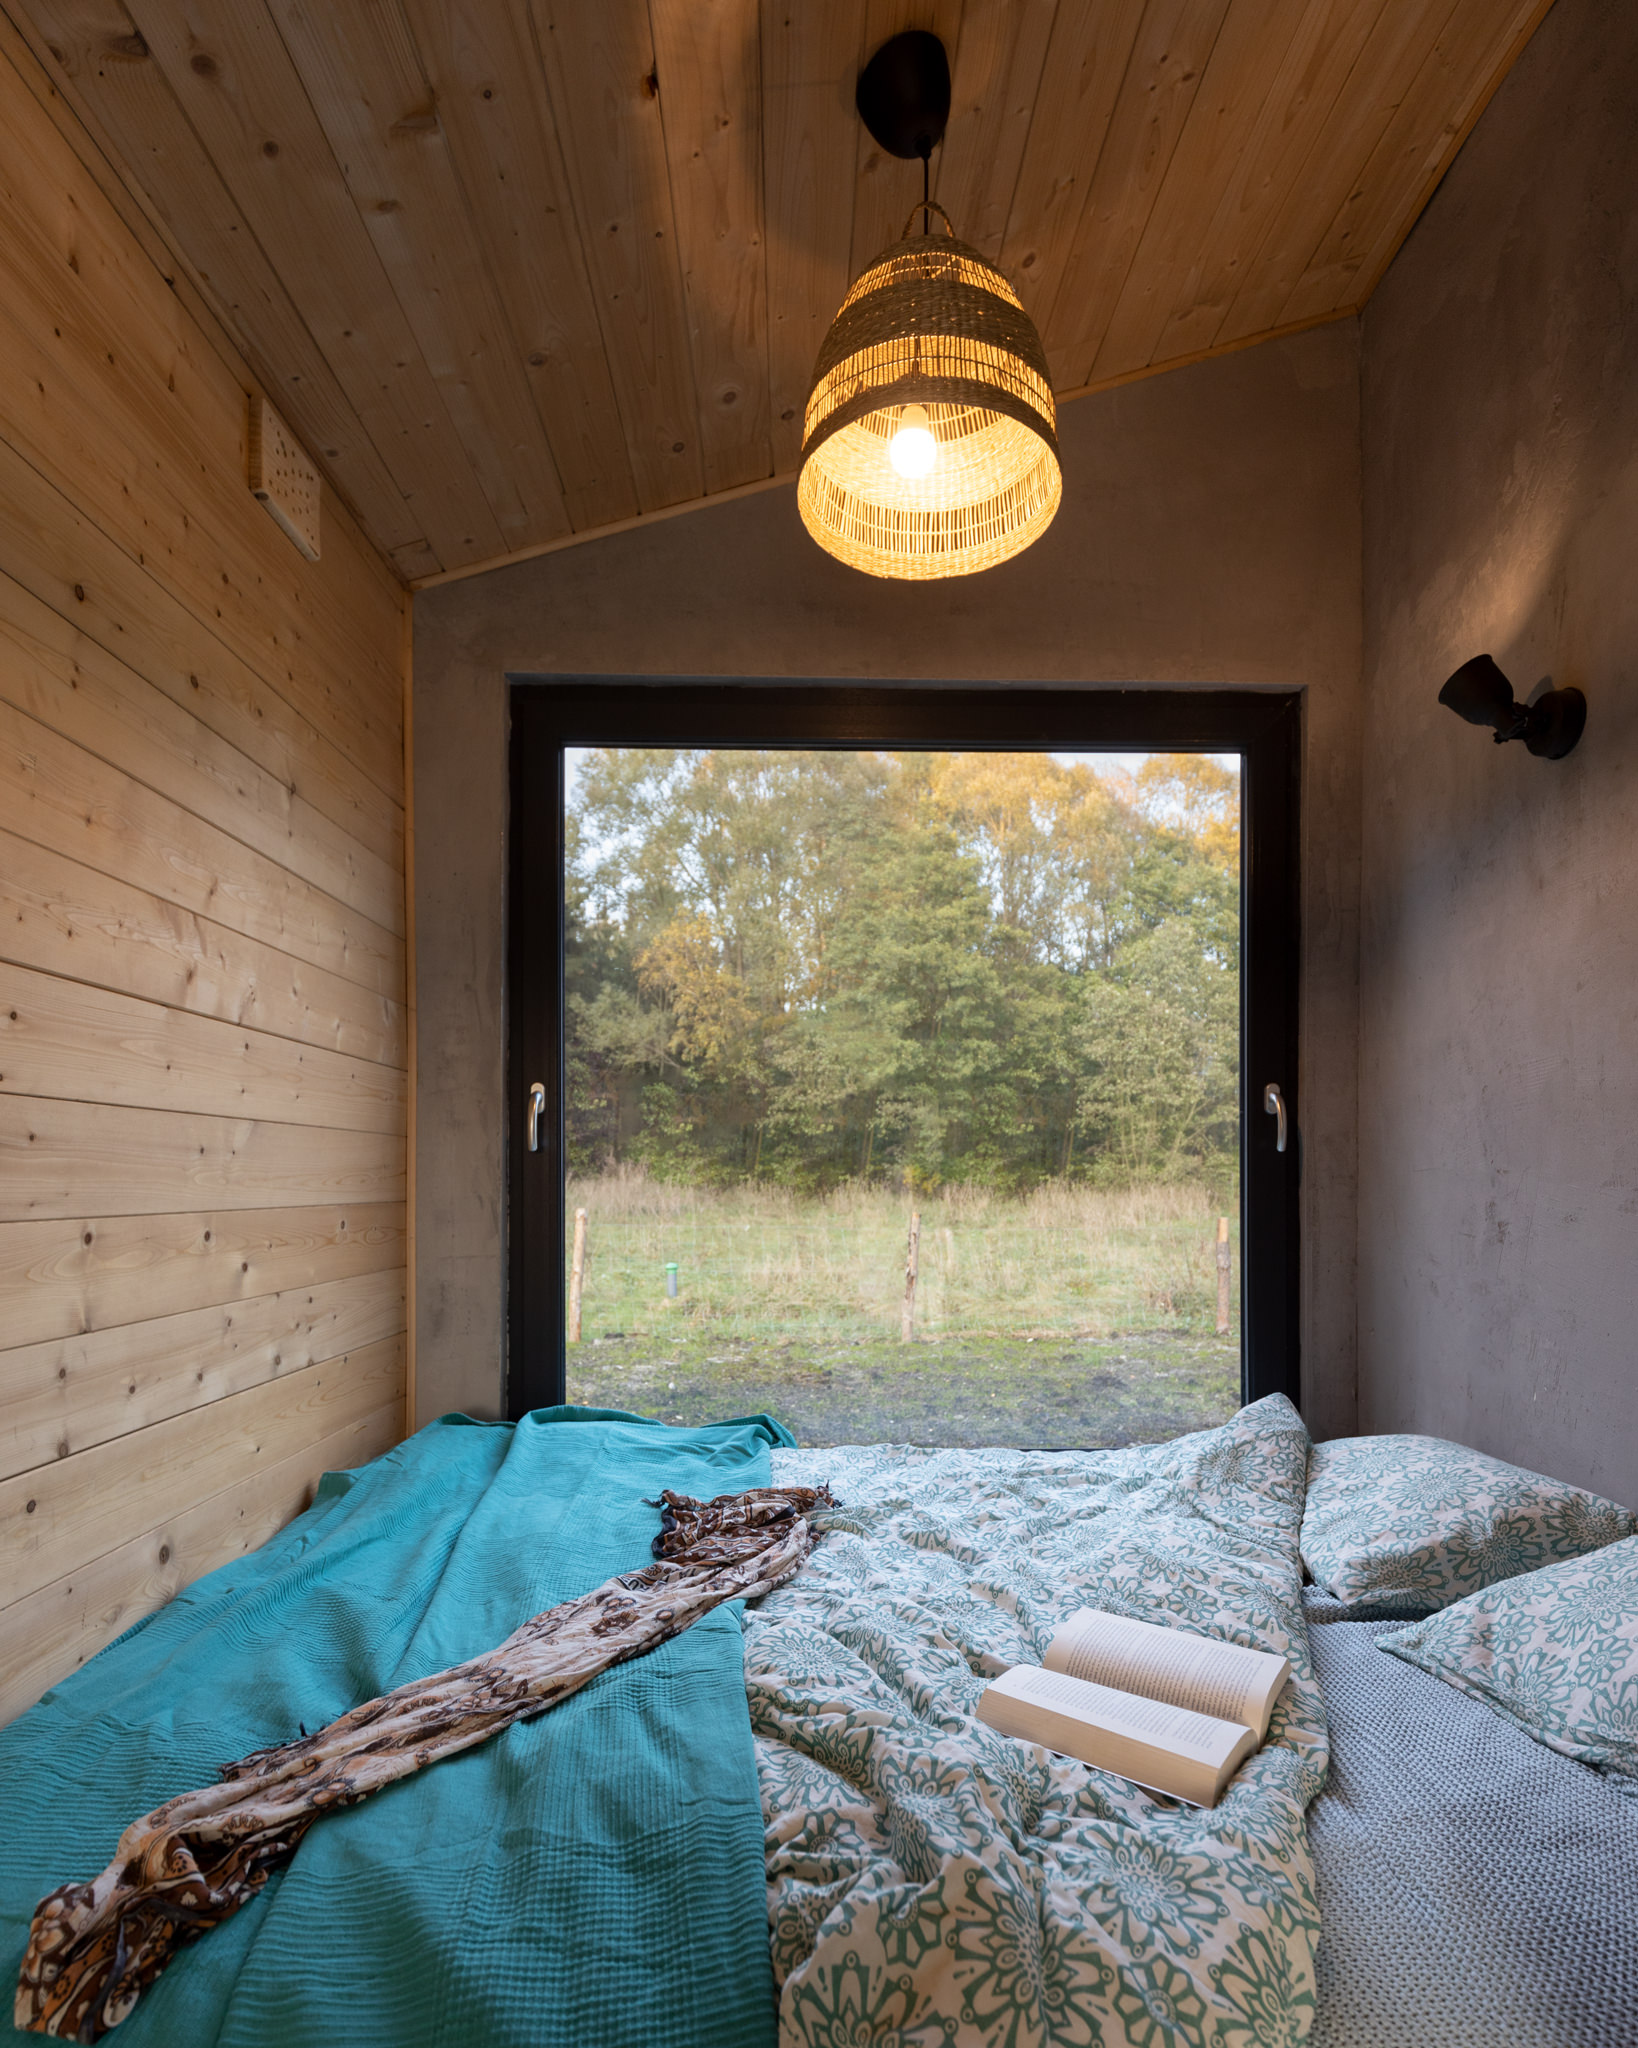 The bedroom with the fir-pine forest view